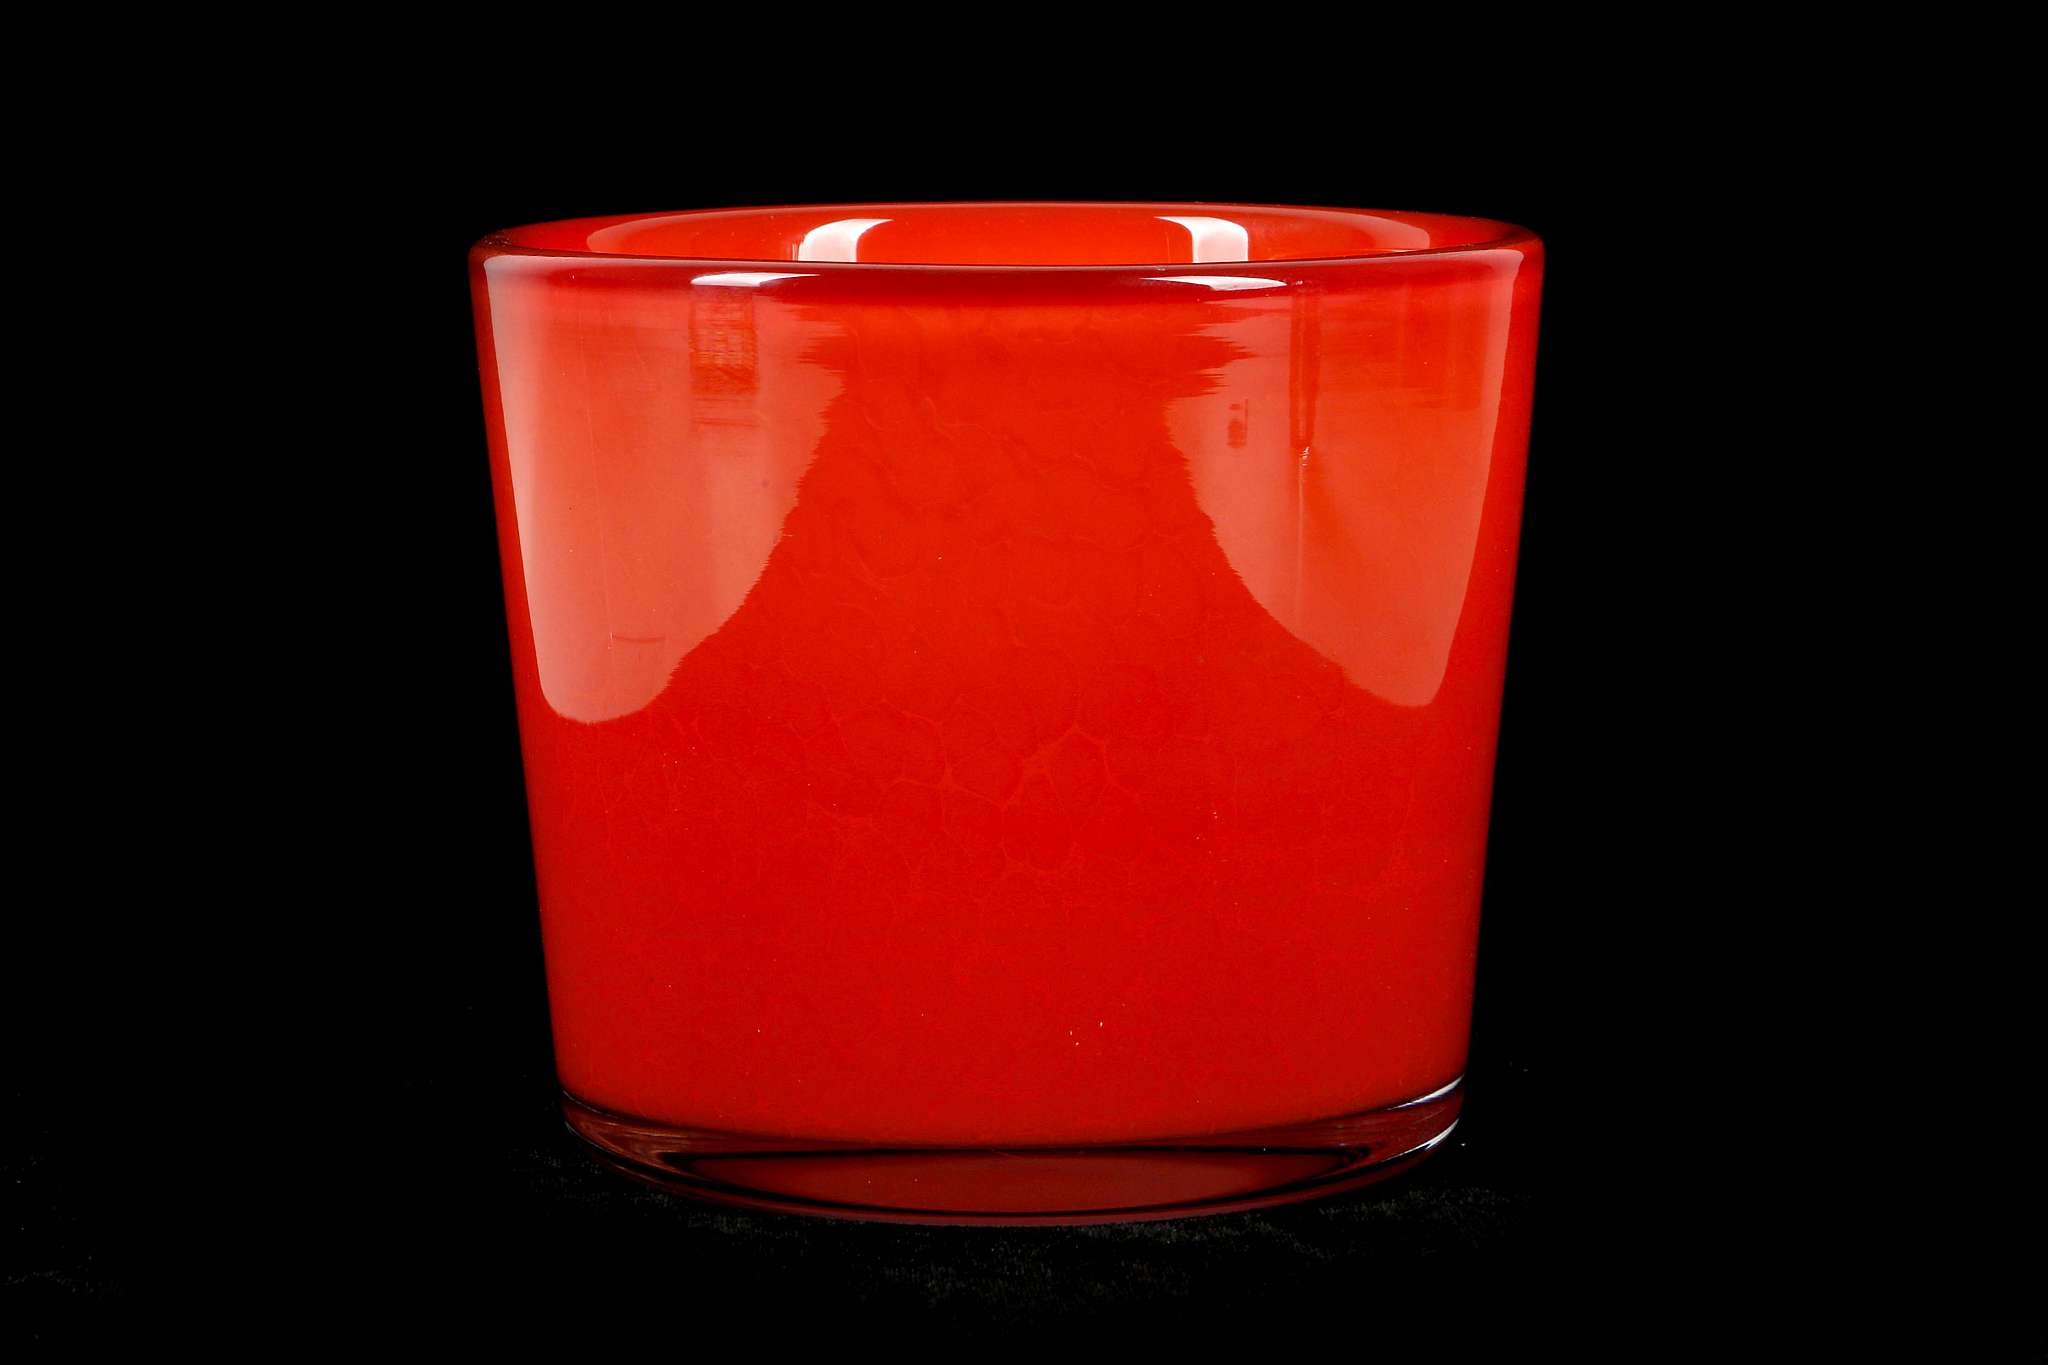 SVEND PALMQVIST for ORREFORS, a red cased glass vase, possibly an exhibition piece, bears gold